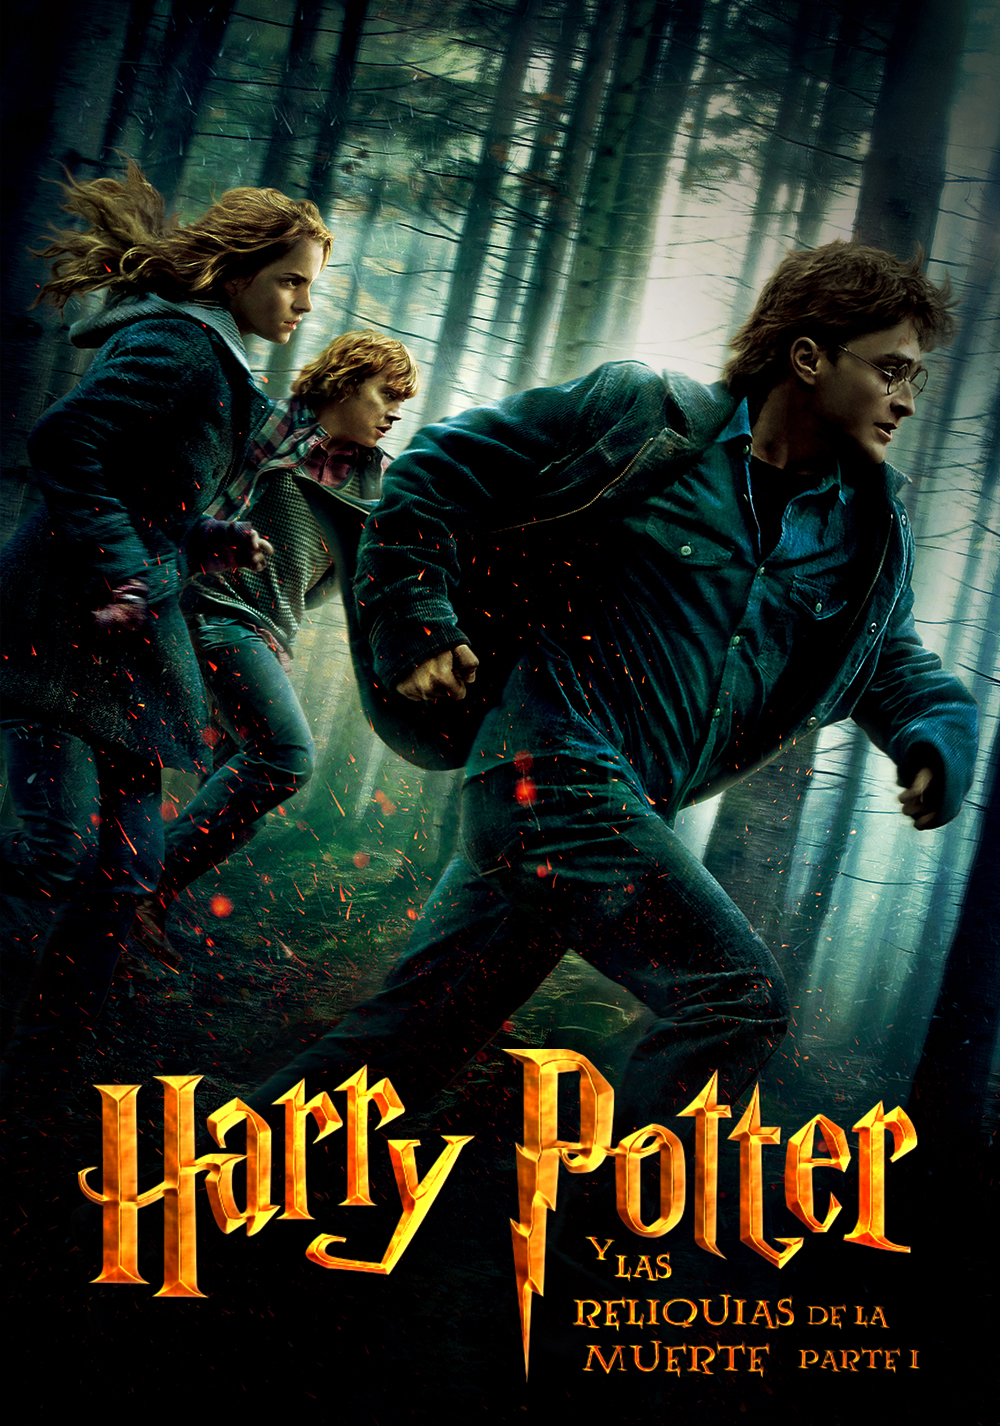 Harry Potter and the Deathly Hallows: Part 1 Art